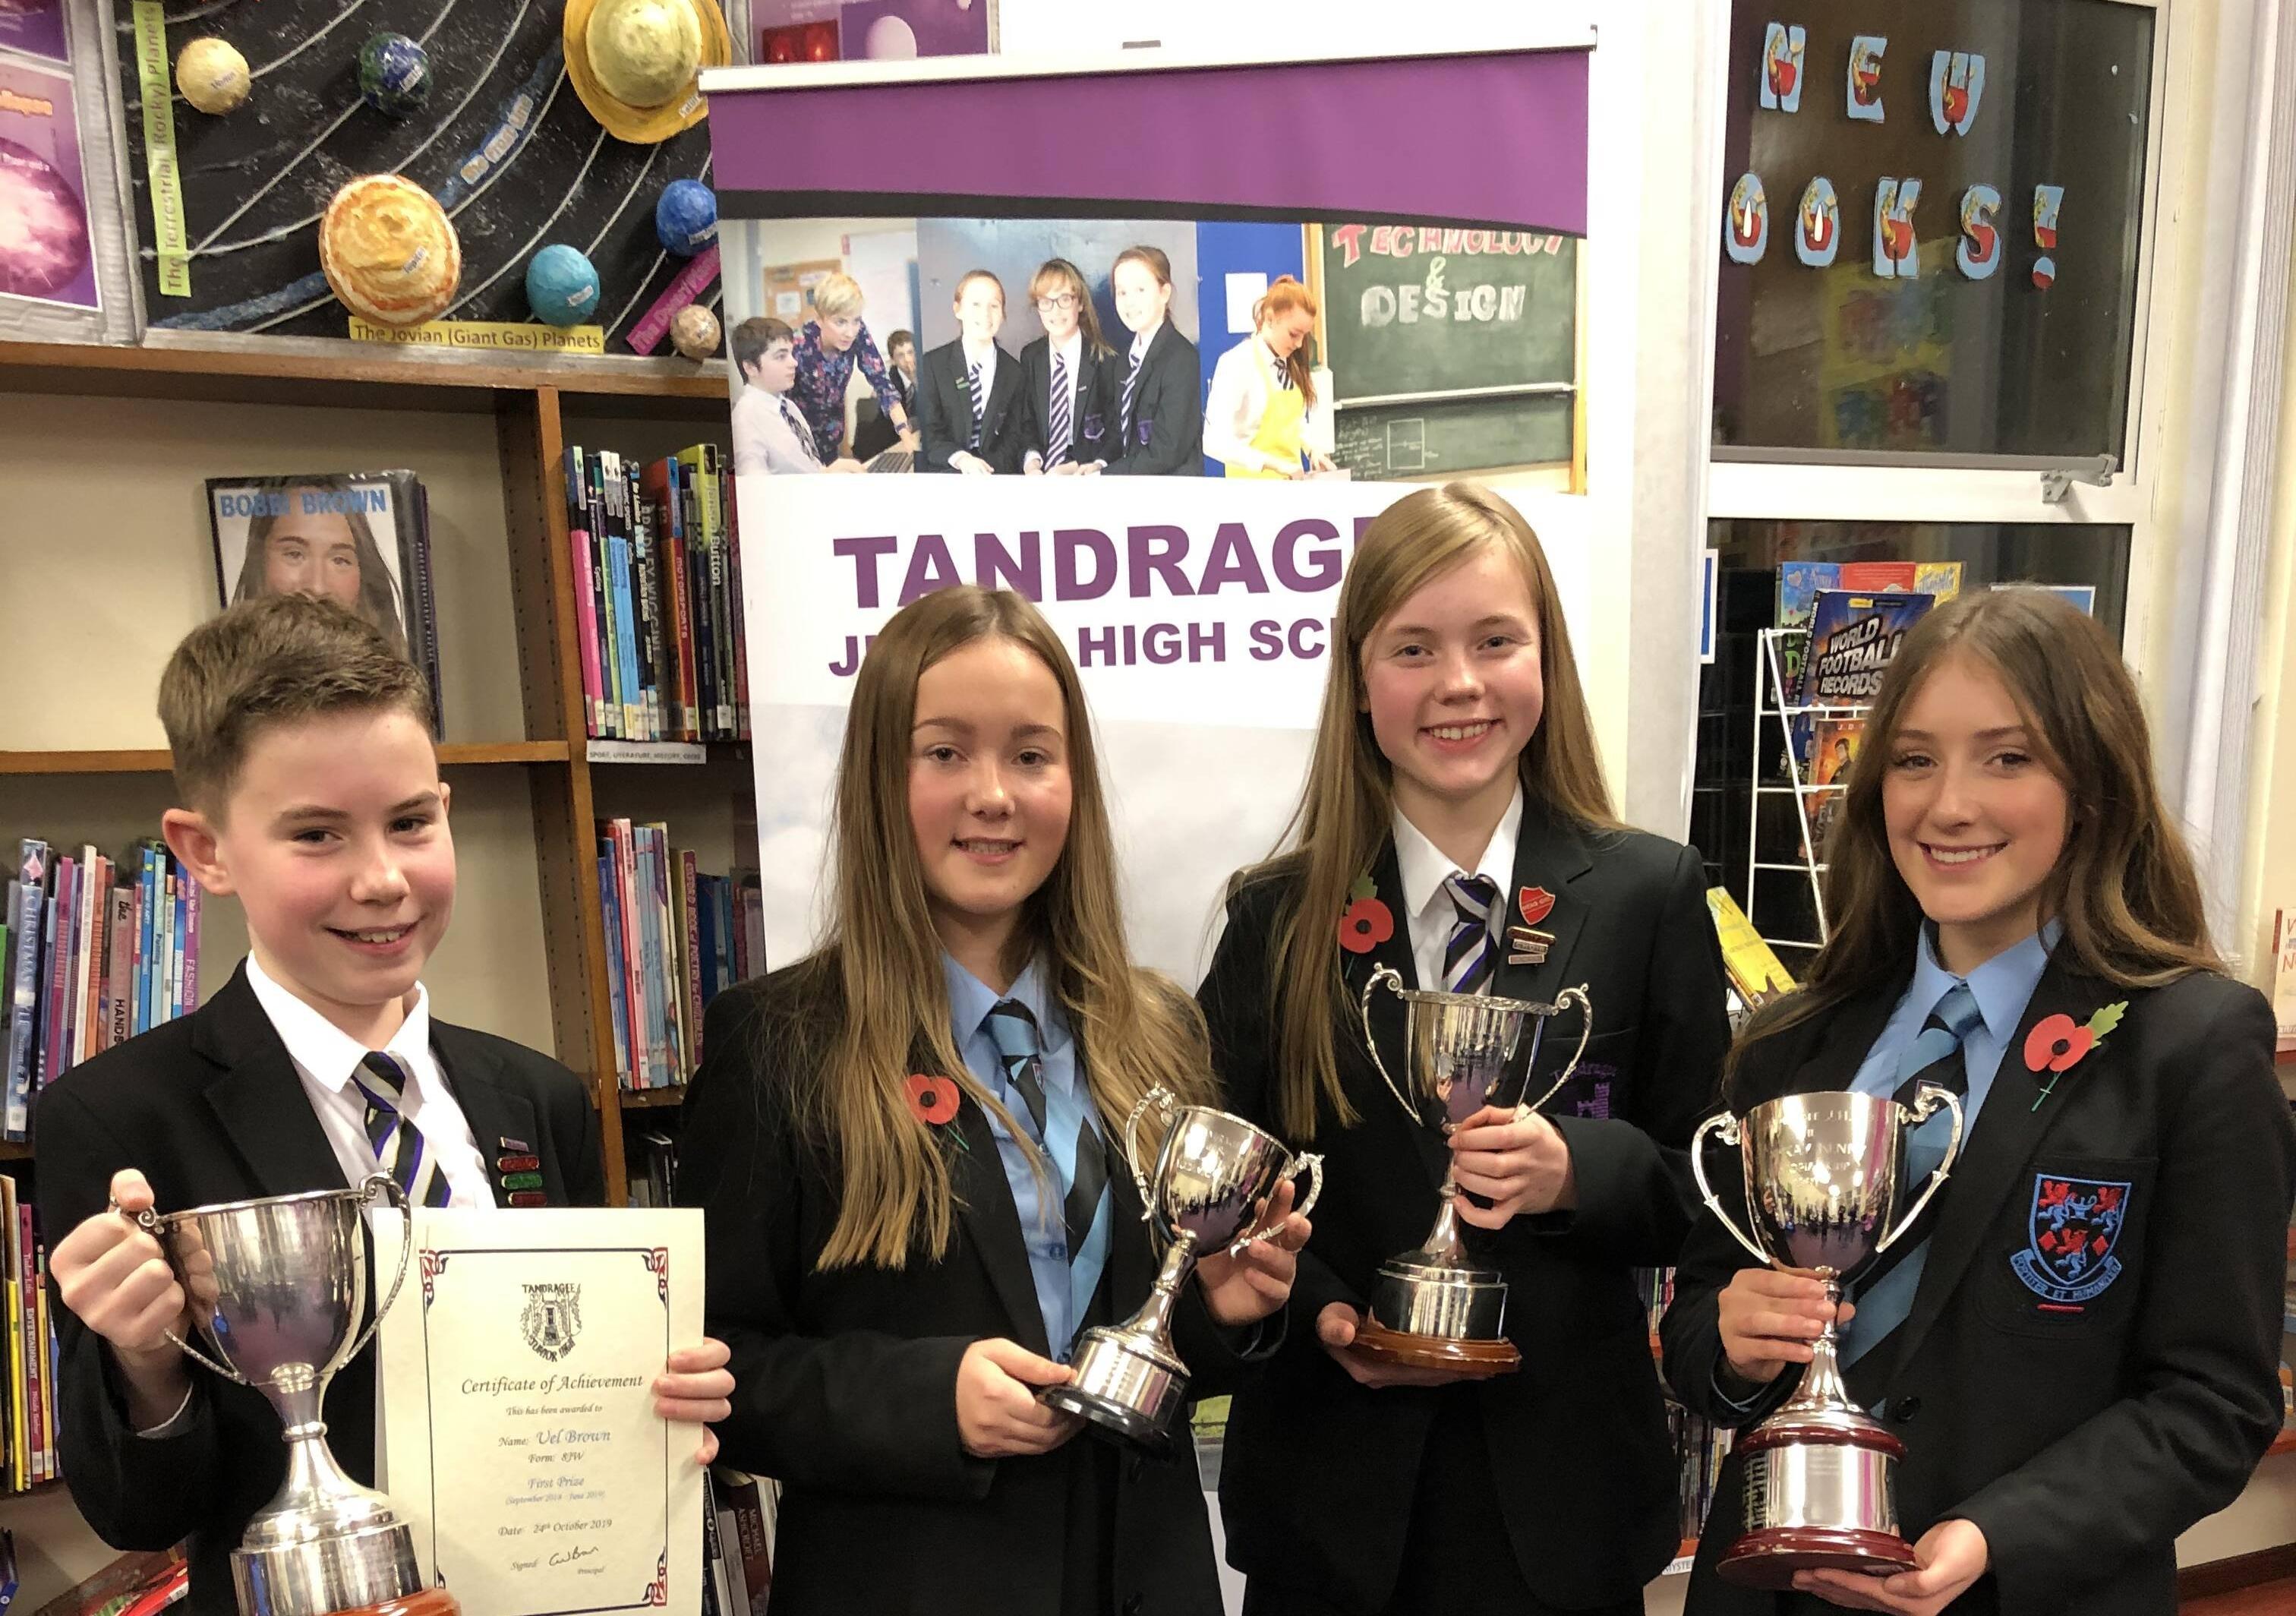 Receiving Awards for Academic Achievement and Excellence at the Tandragee Junior High School prize night are  Uel Brown, Ella Duke, Rachel Spence and Charlotte Eagle